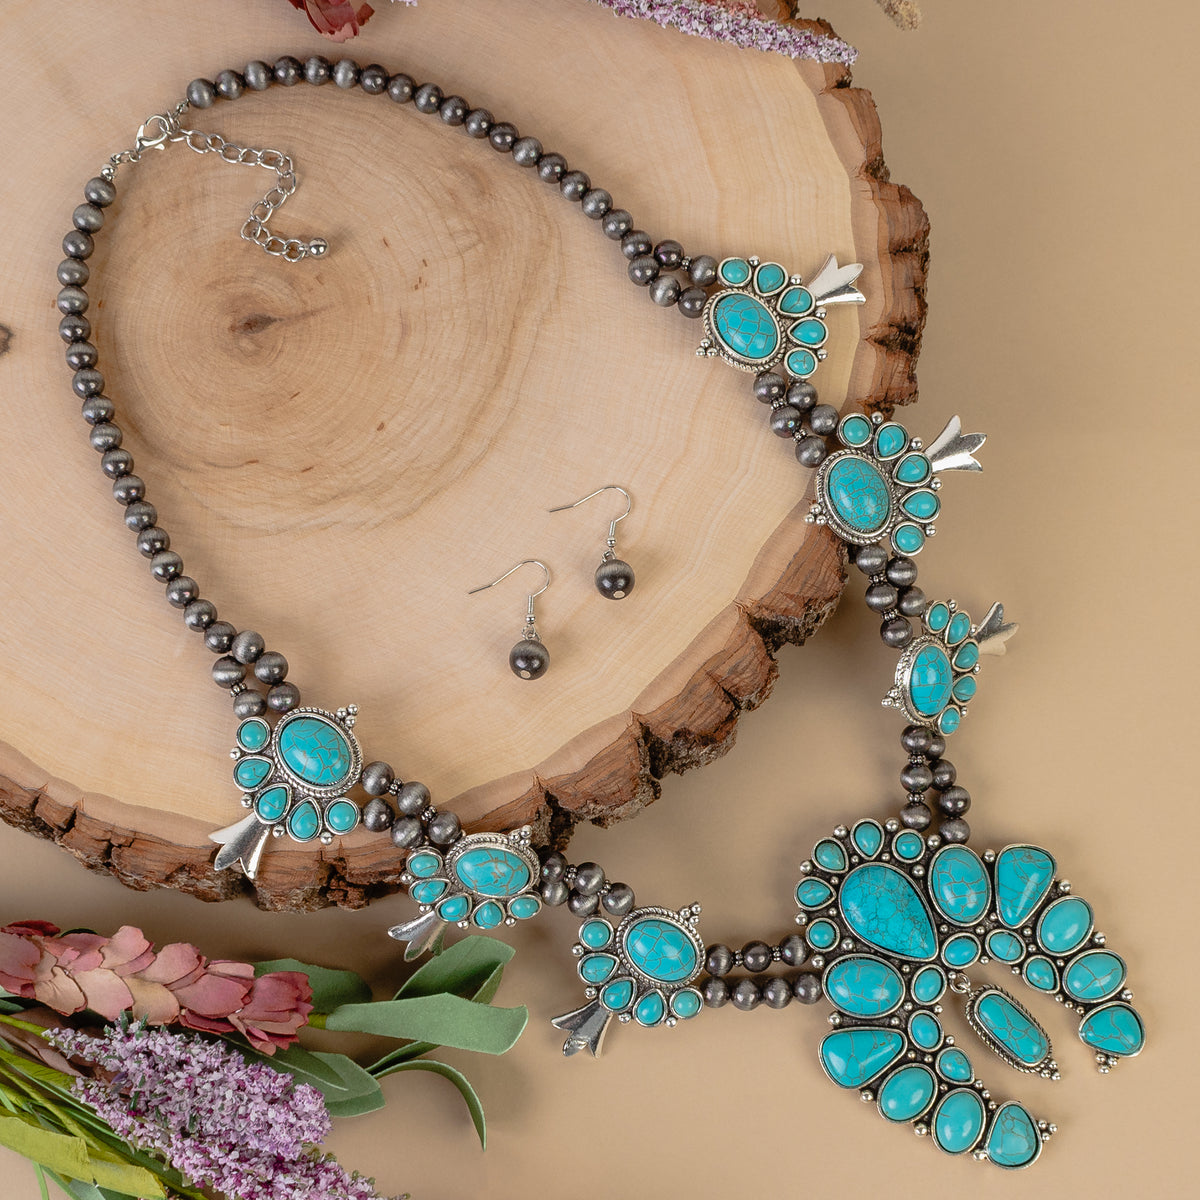 92013 - Squash Blossom Necklace - Turquoise & Silver